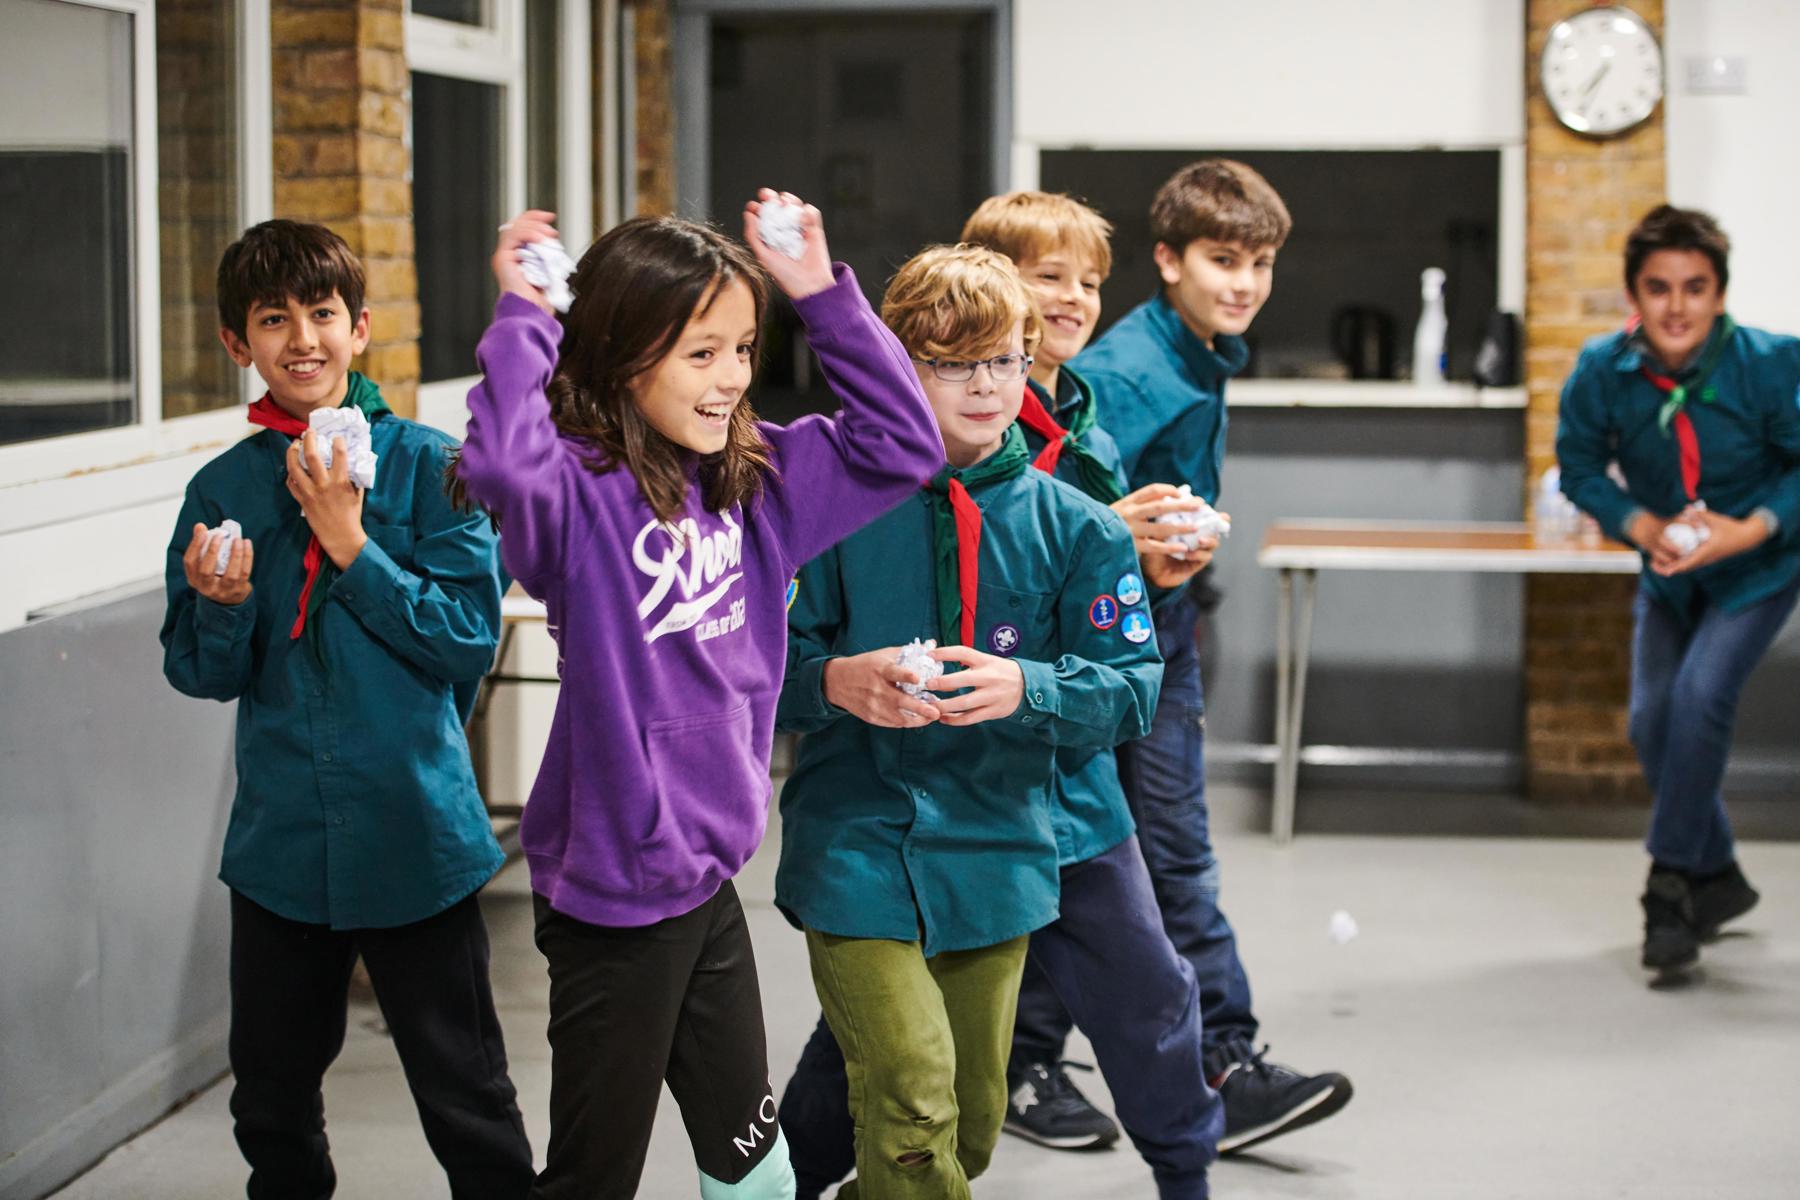 A group of Scouts are inside their meeting place. There are six boys and a girl. They are playing a throwing game, running around and holding balls of paper to throw. The girl at the front looks very excited, as she is holding balls of paper in both hands and has both arms in the air, ready to throw them. She is wearing a purple hoodie.